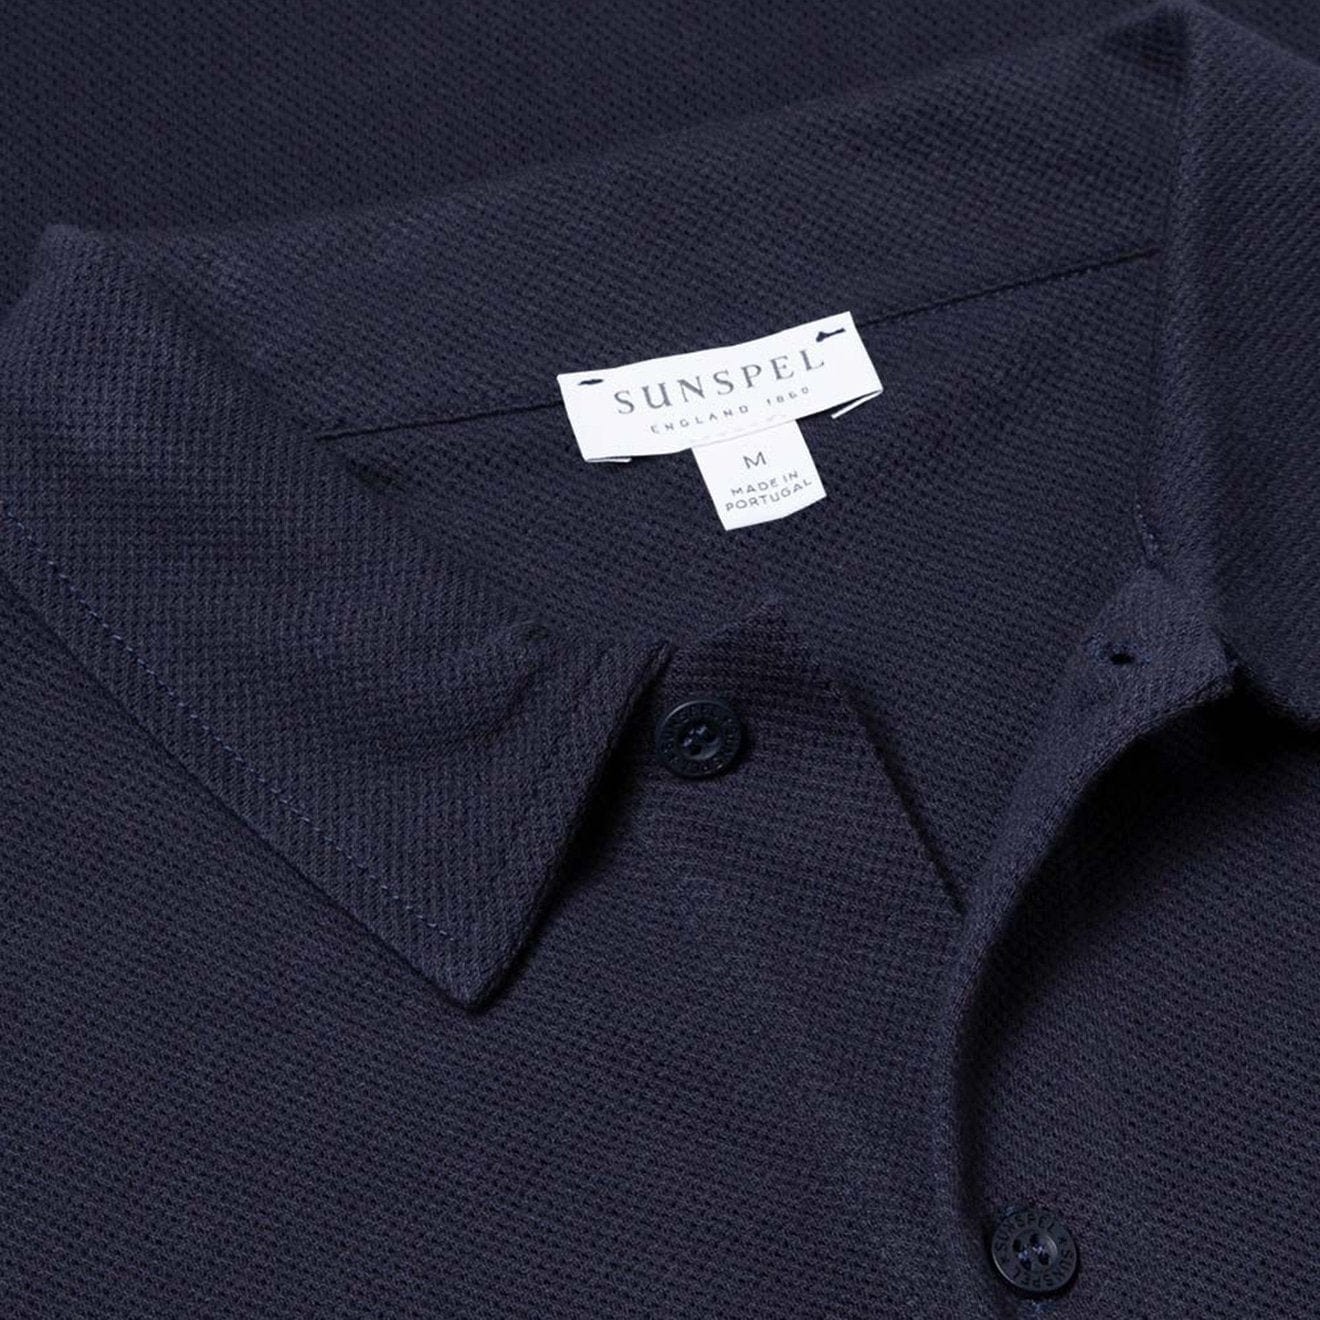 Sunspel Long Sleeved Riviera Polo Navy | The Sporting Lodge